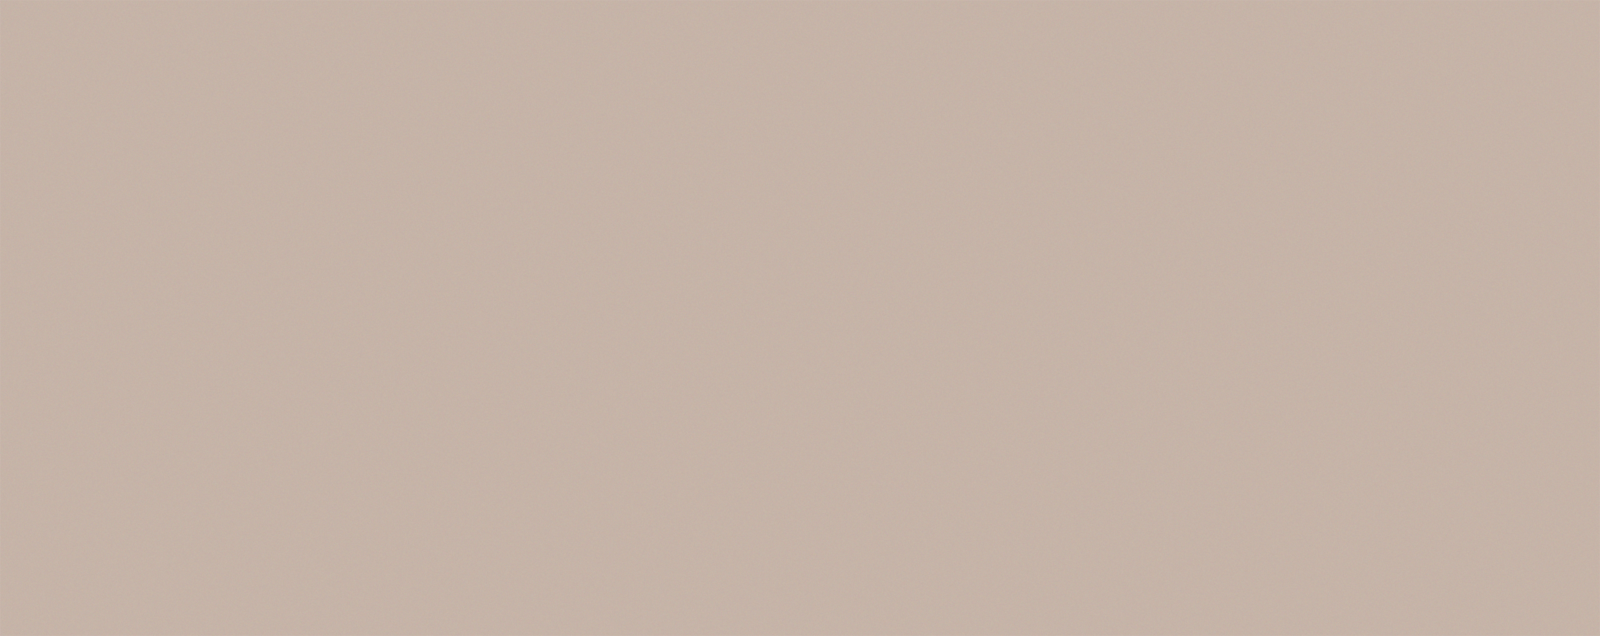 Textured Background Taupe